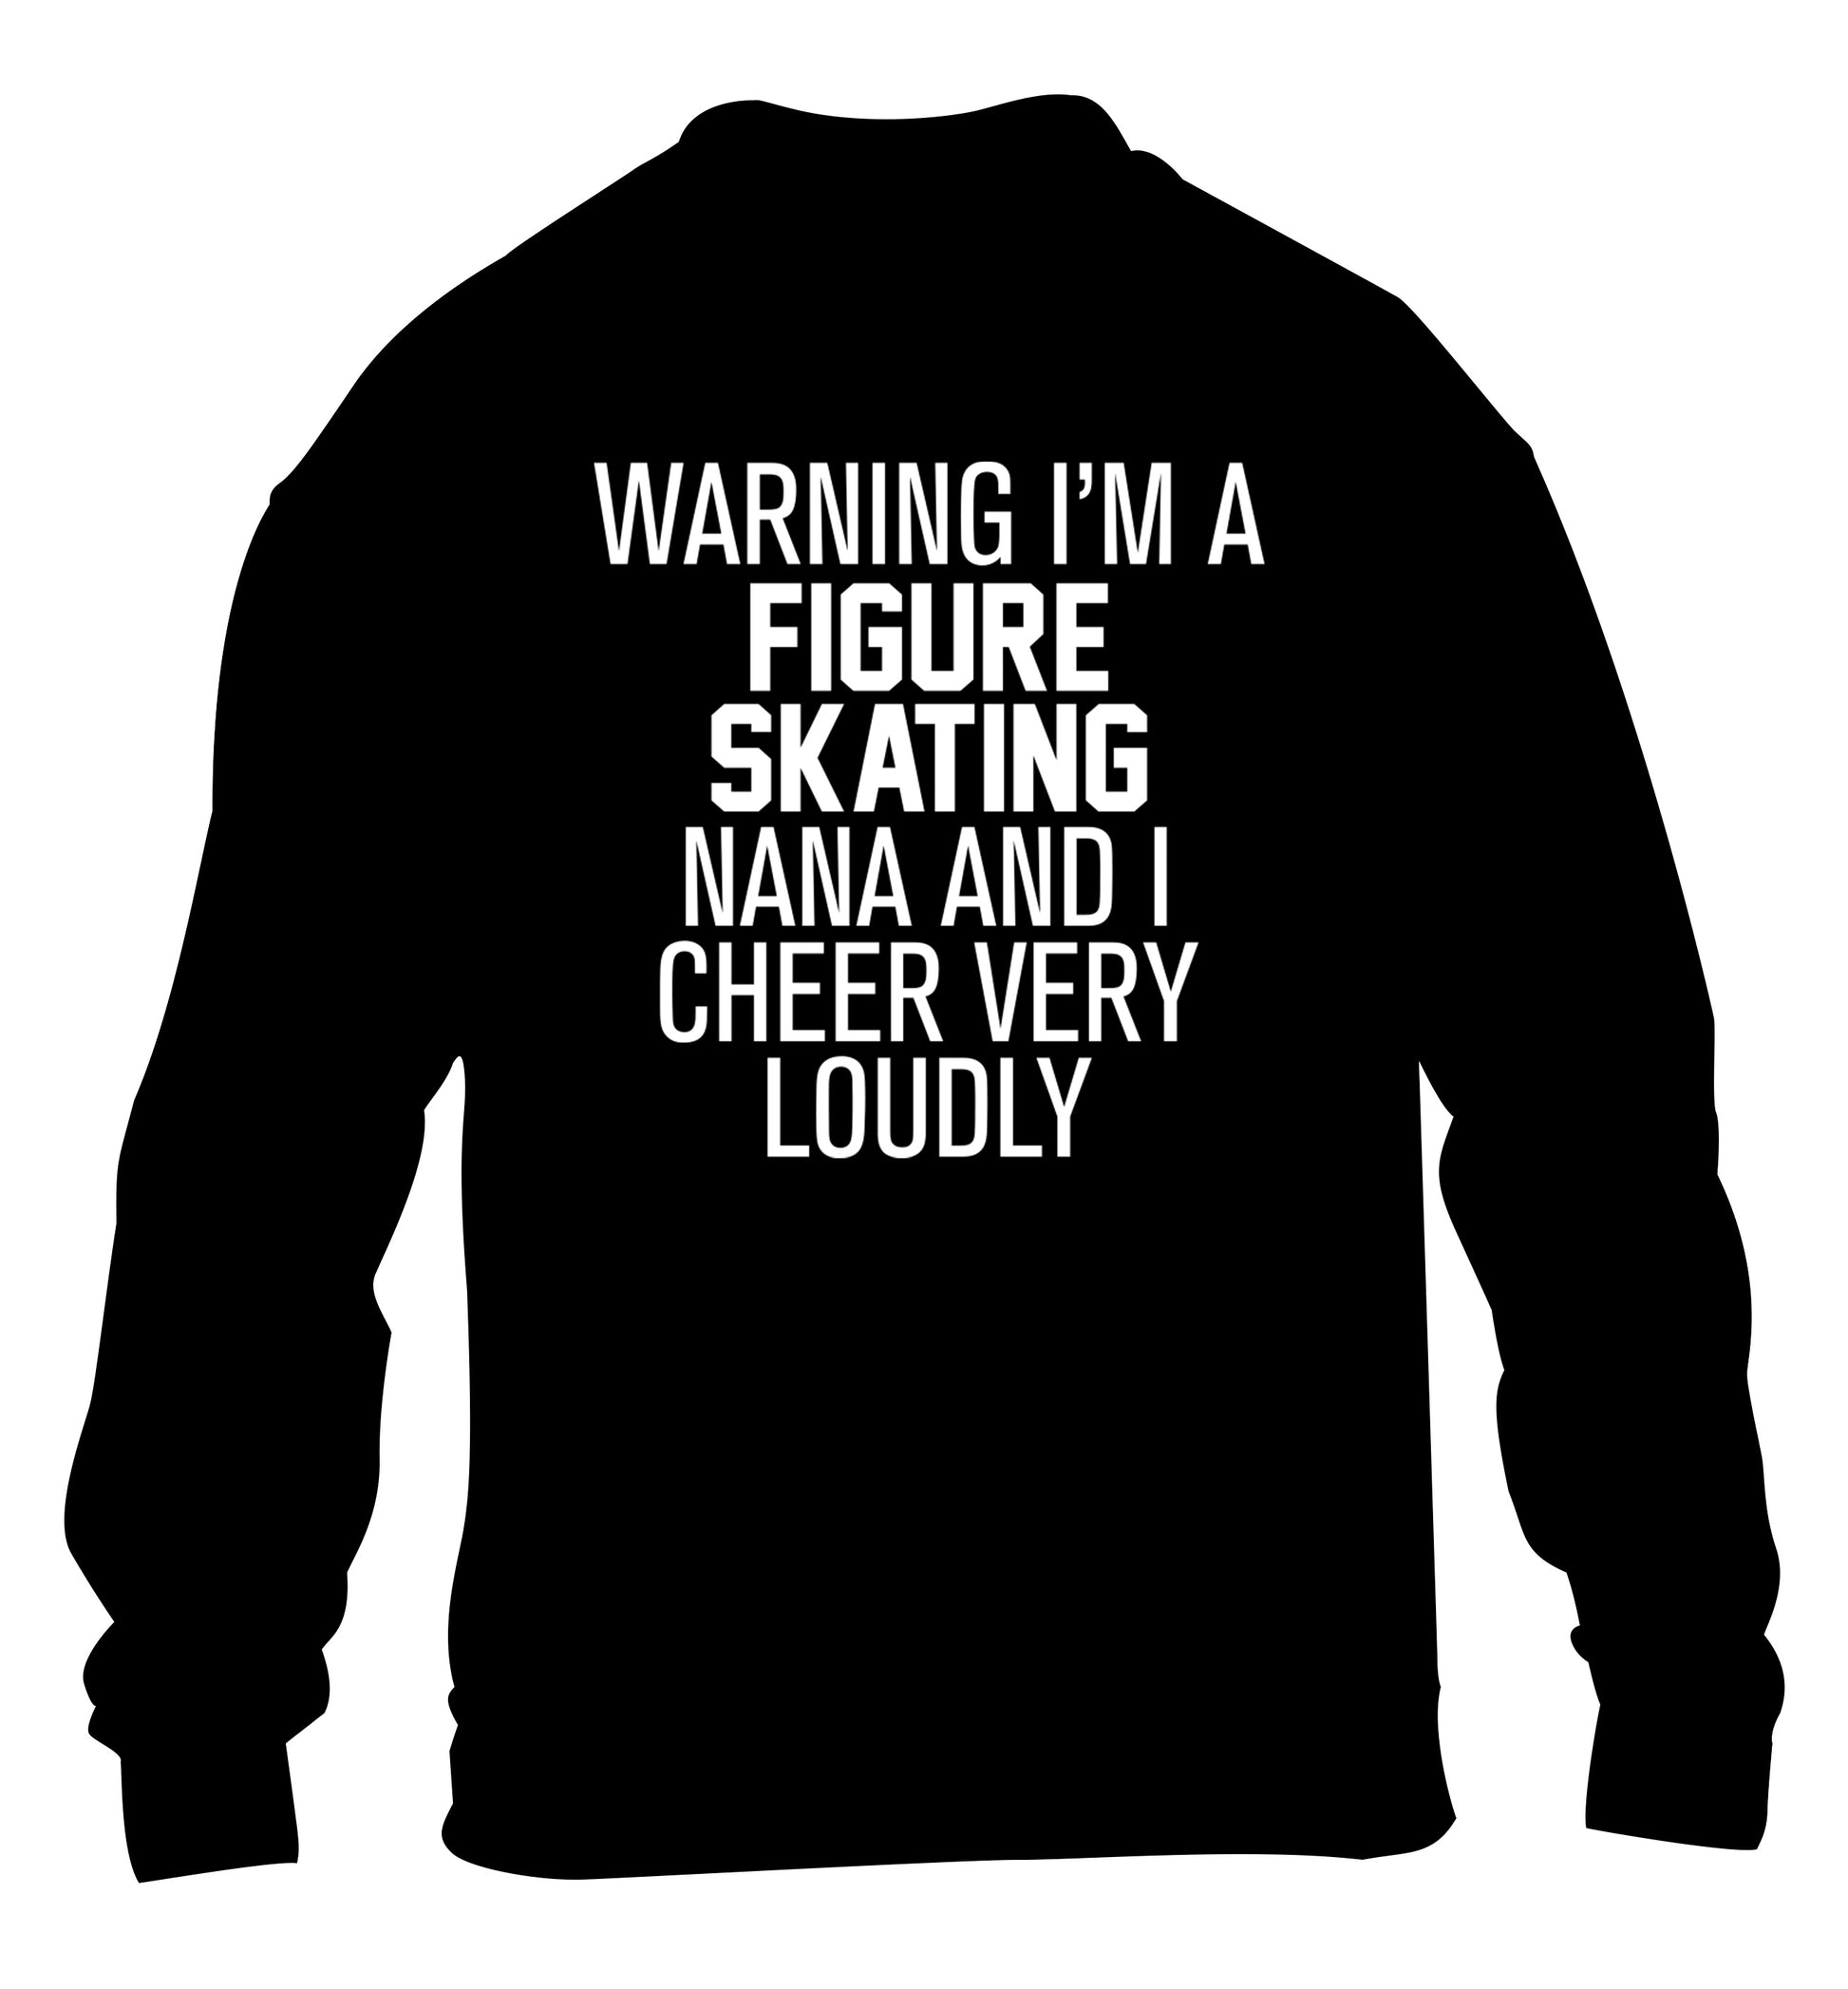 Warning I'm a figure skating nana and I cheer very loudly children's black sweater 12-14 Years